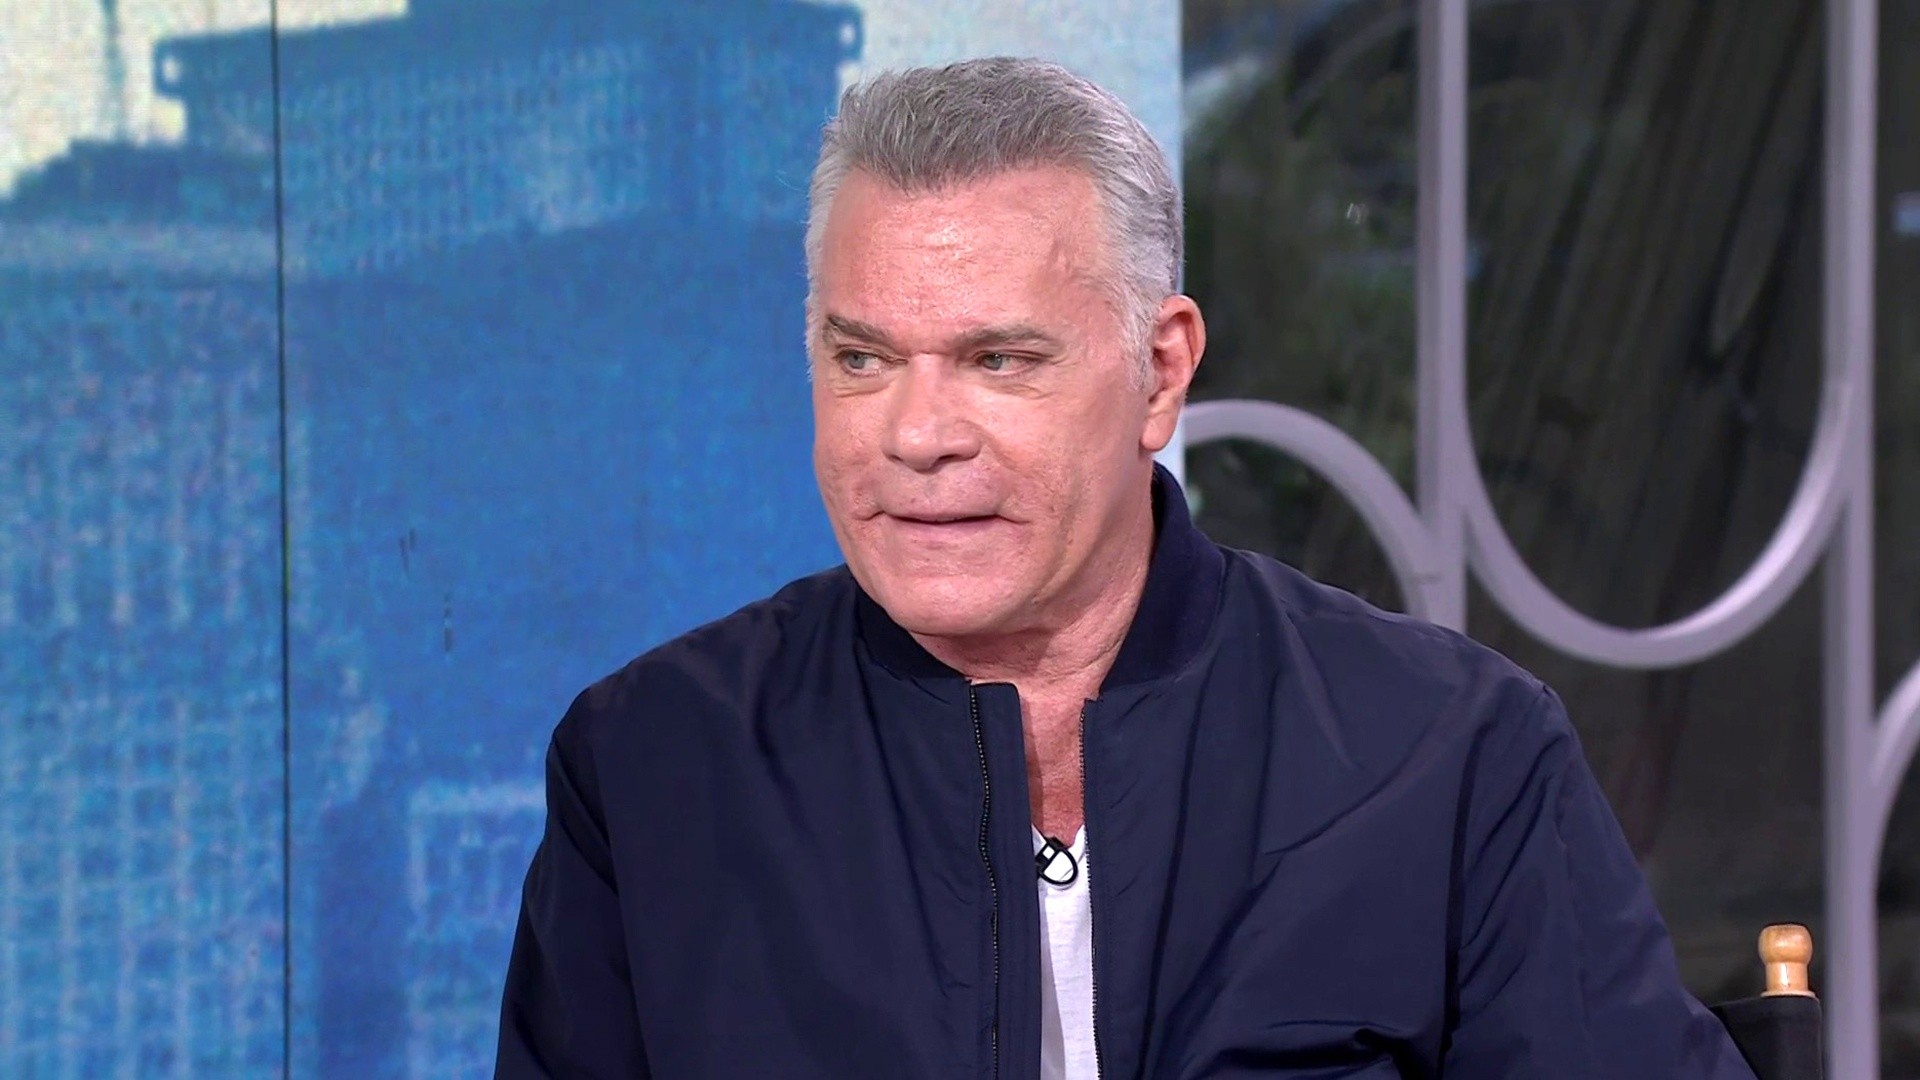 Ray Liotta recalls his mom dying while filming 'Goodfellas'